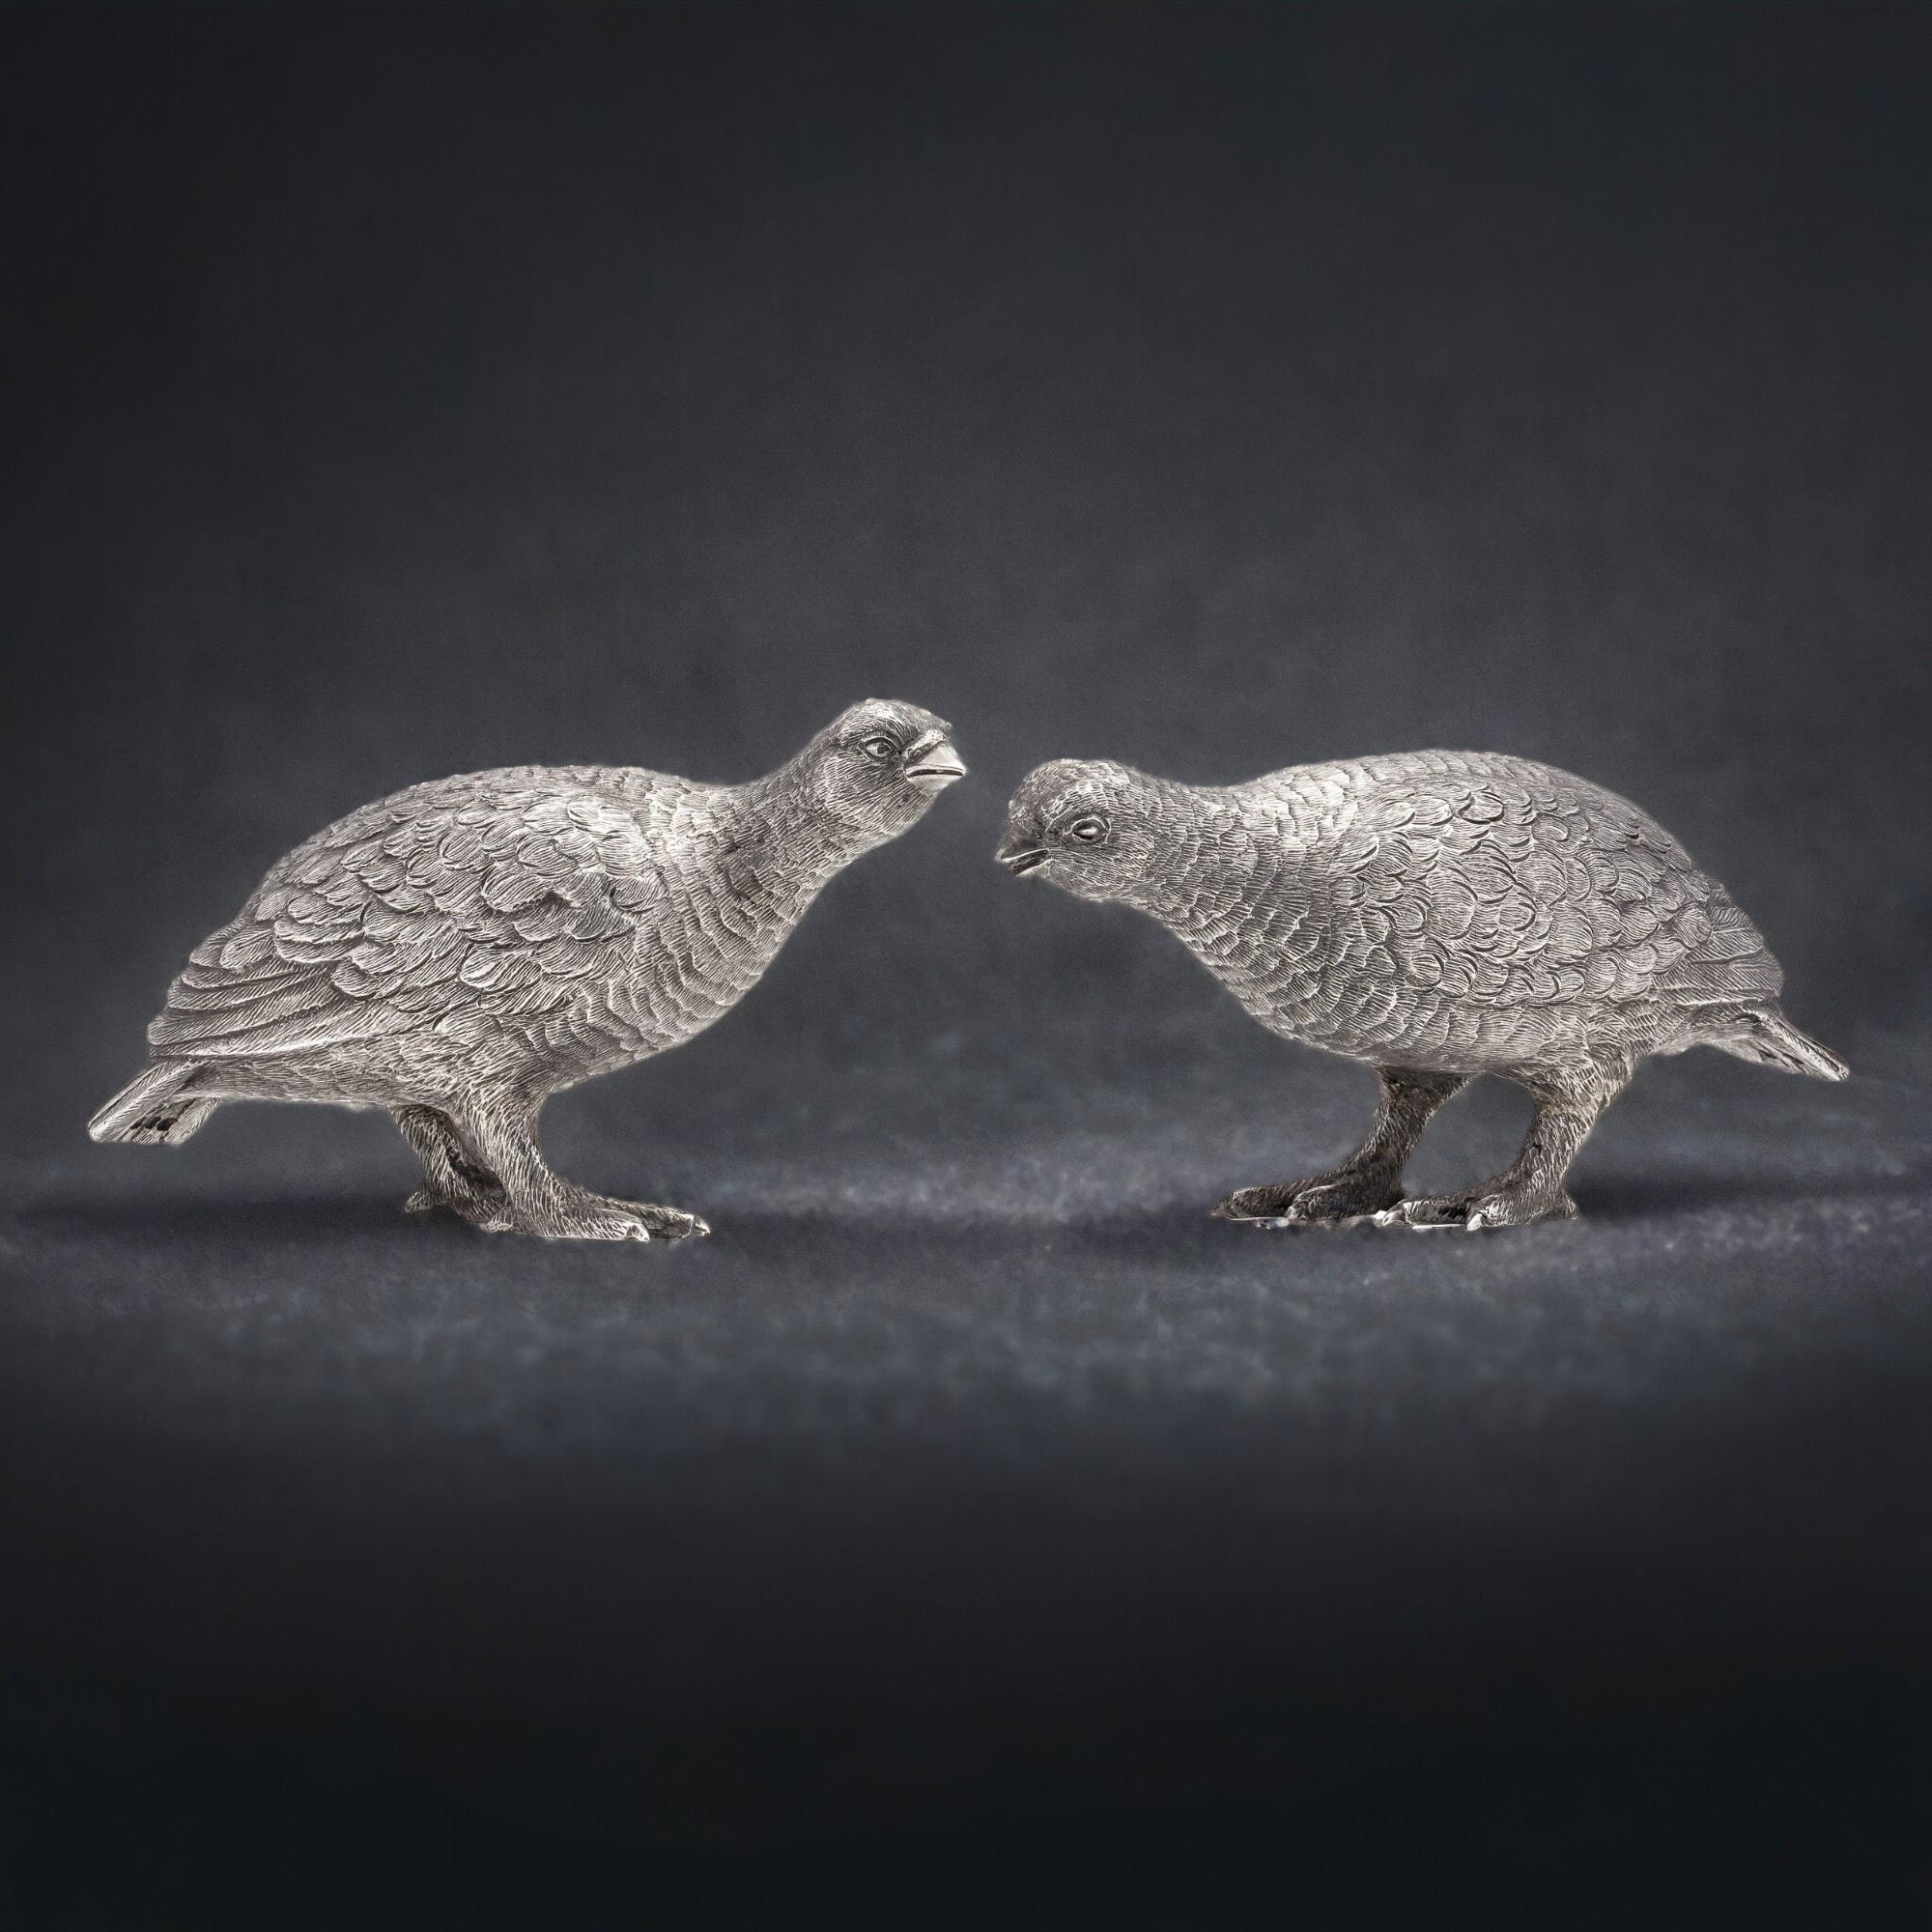 Vintage sterling silver pair of grouse bird models. 
Made in England, London, 1966
Maker: William Comyns & Sons Ltd. 
Fully hallmarked.

Dimensions:
1st bird size: Length x width x height: 13 x 4.3 x 6.5 cm 
2nd bird size: Length x width x height: